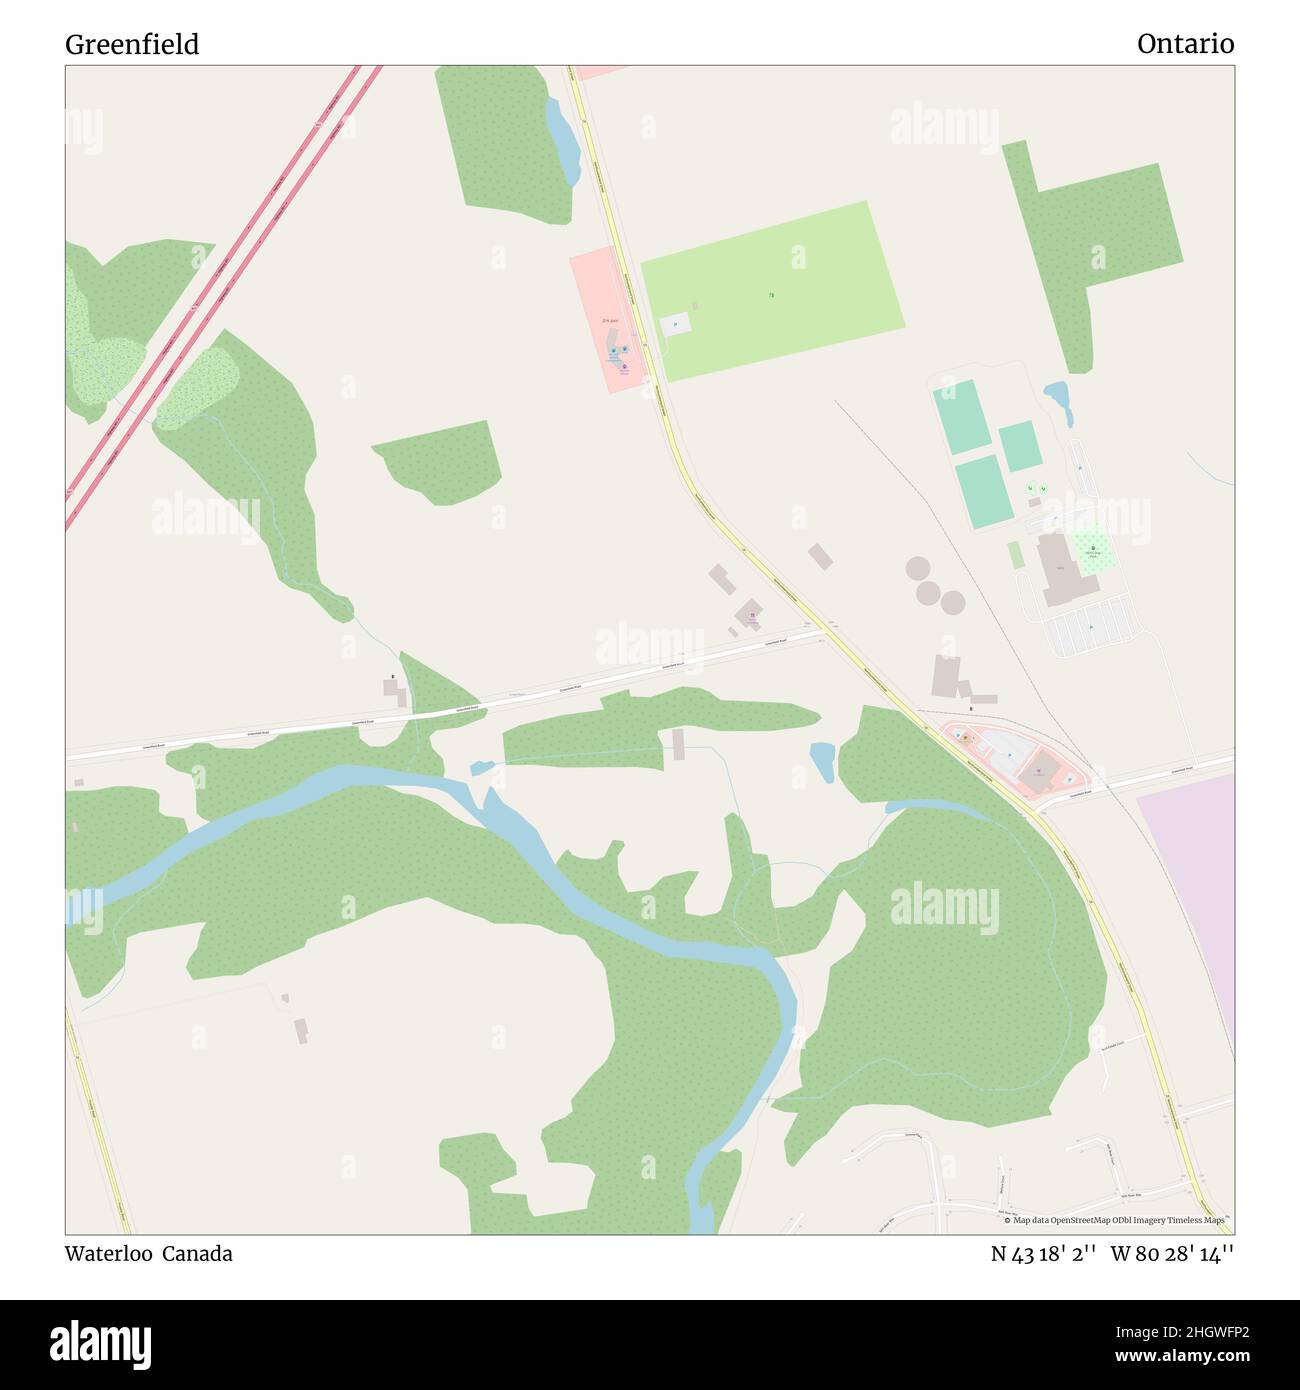 Greenfield, Waterloo, Canada, Ontario, N 43 18' 2'', W 80 28' 14'', map, Timeless Map published in 2021. Travelers, explorers and adventurers like Florence Nightingale, David Livingstone, Ernest Shackleton, Lewis and Clark and Sherlock Holmes relied on maps to plan travels to the world's most remote corners, Timeless Maps is mapping most locations on the globe, showing the achievement of great dreams Stock Photo